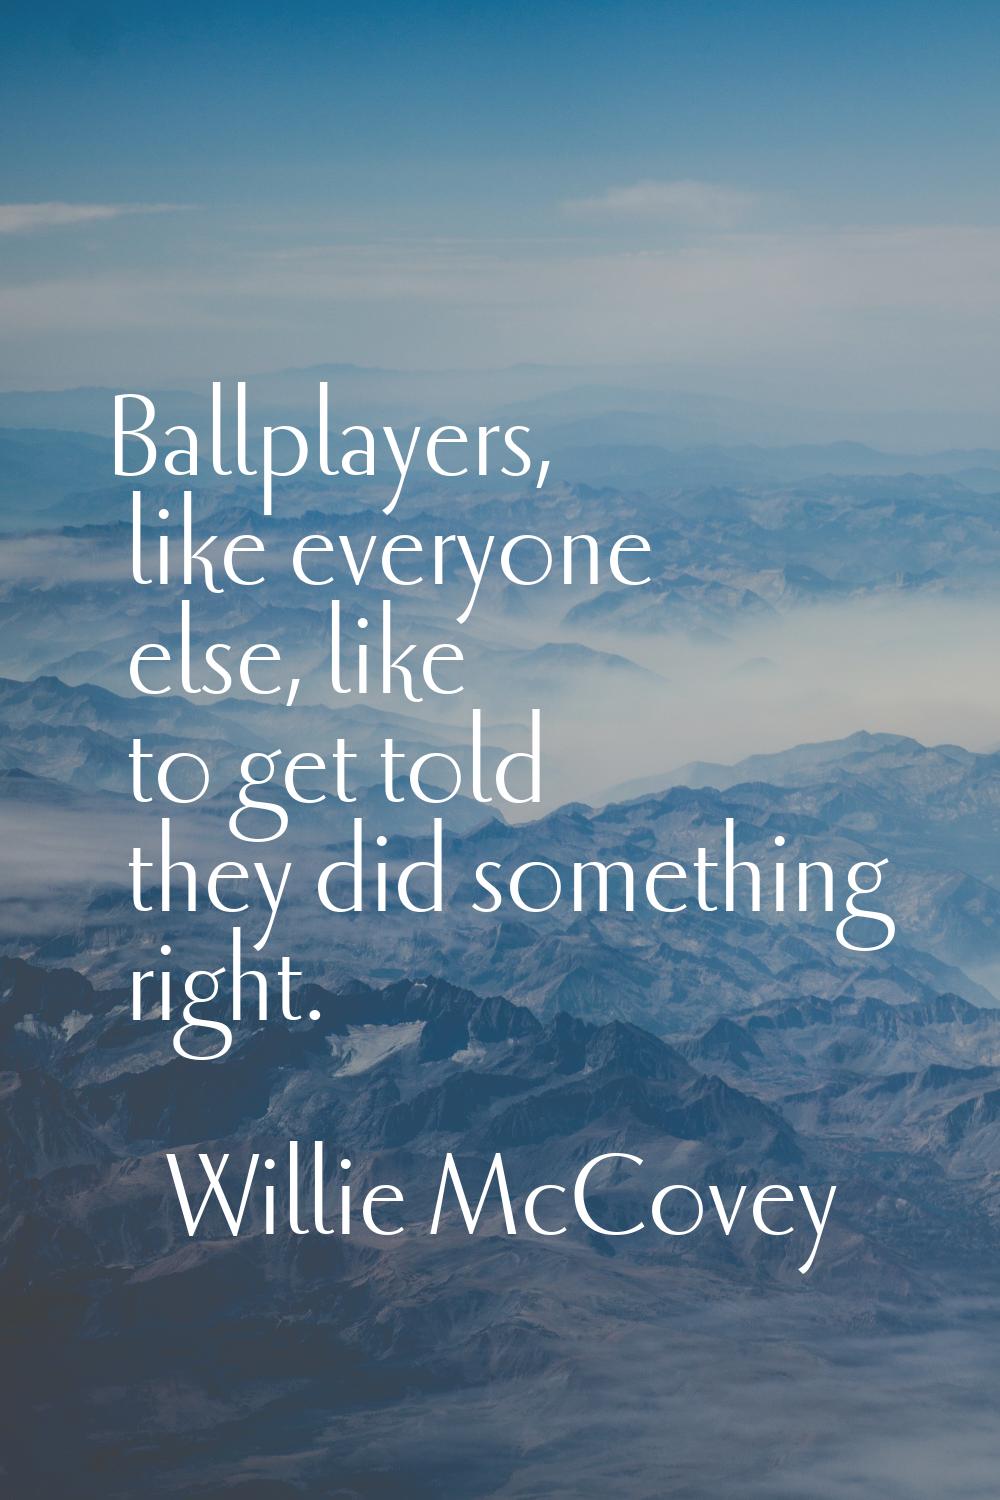 Ballplayers, like everyone else, like to get told they did something right.